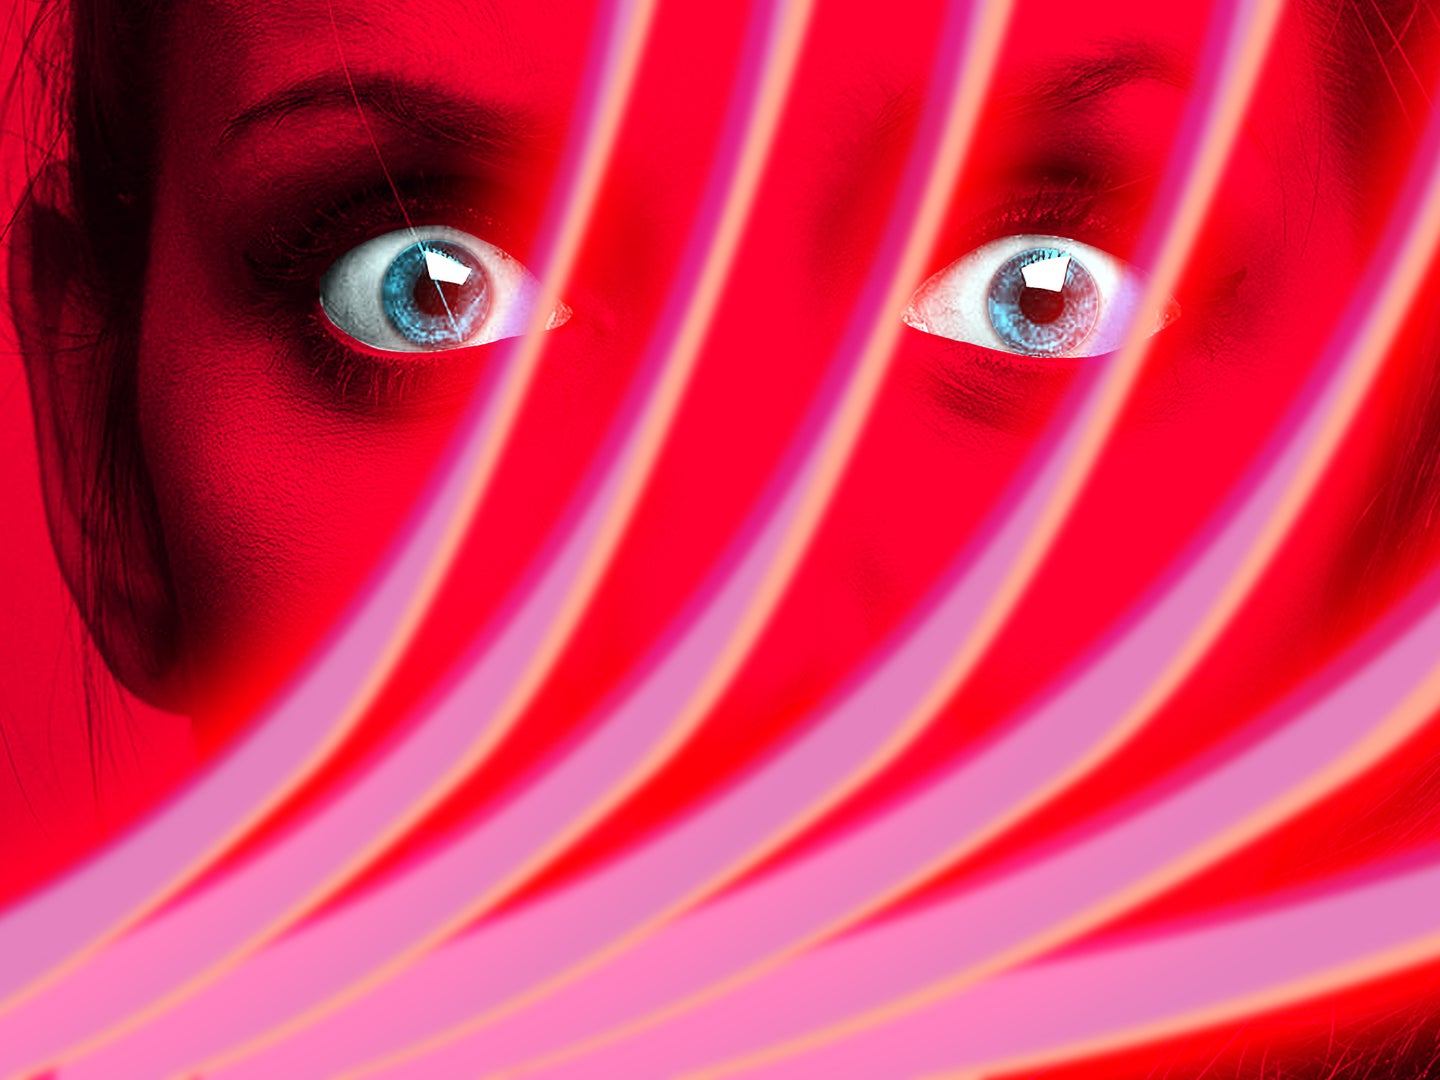 A woman expressing shock and brain tingling under sound waves of the Shepard Tone in red and pink